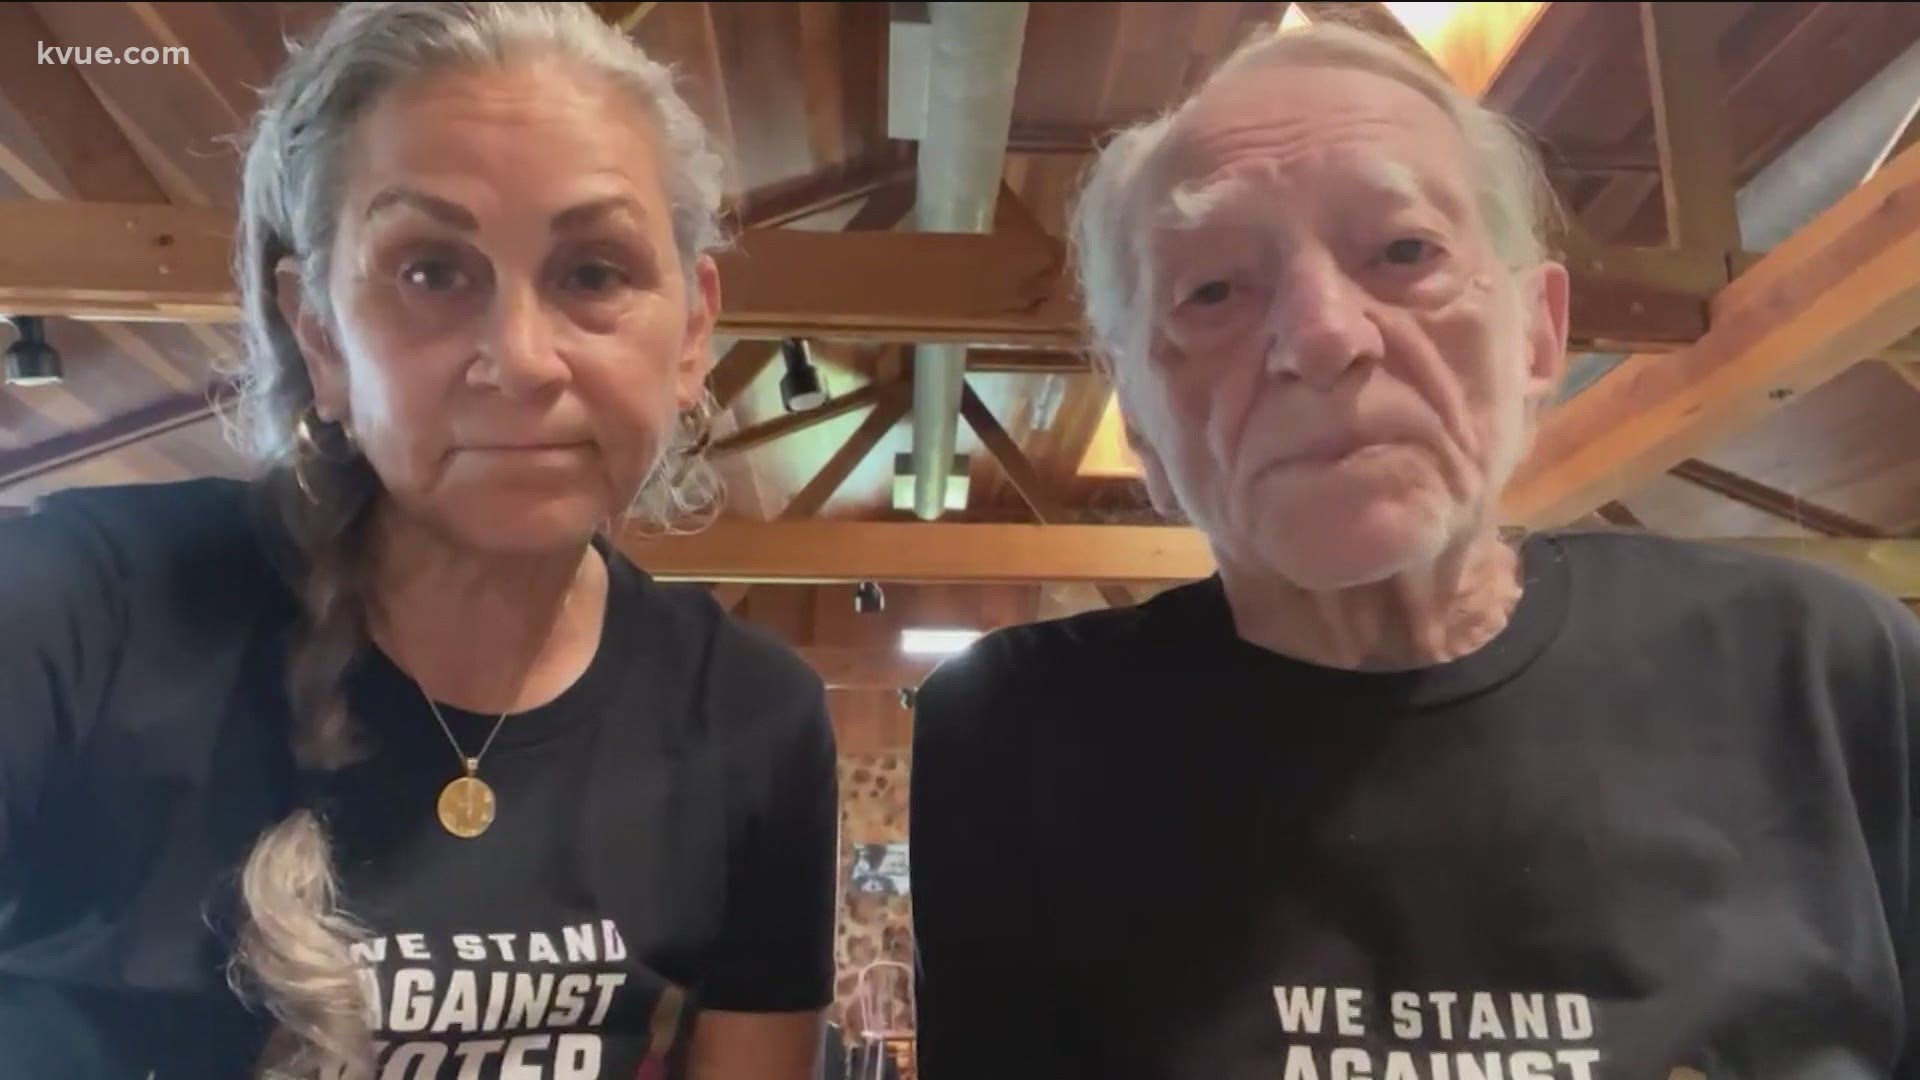 Willie Nelson and Beto O'Rourke have started a fundraising campaign to assist the Texas Democrats to advocate for voting rights in Washington, D.C.